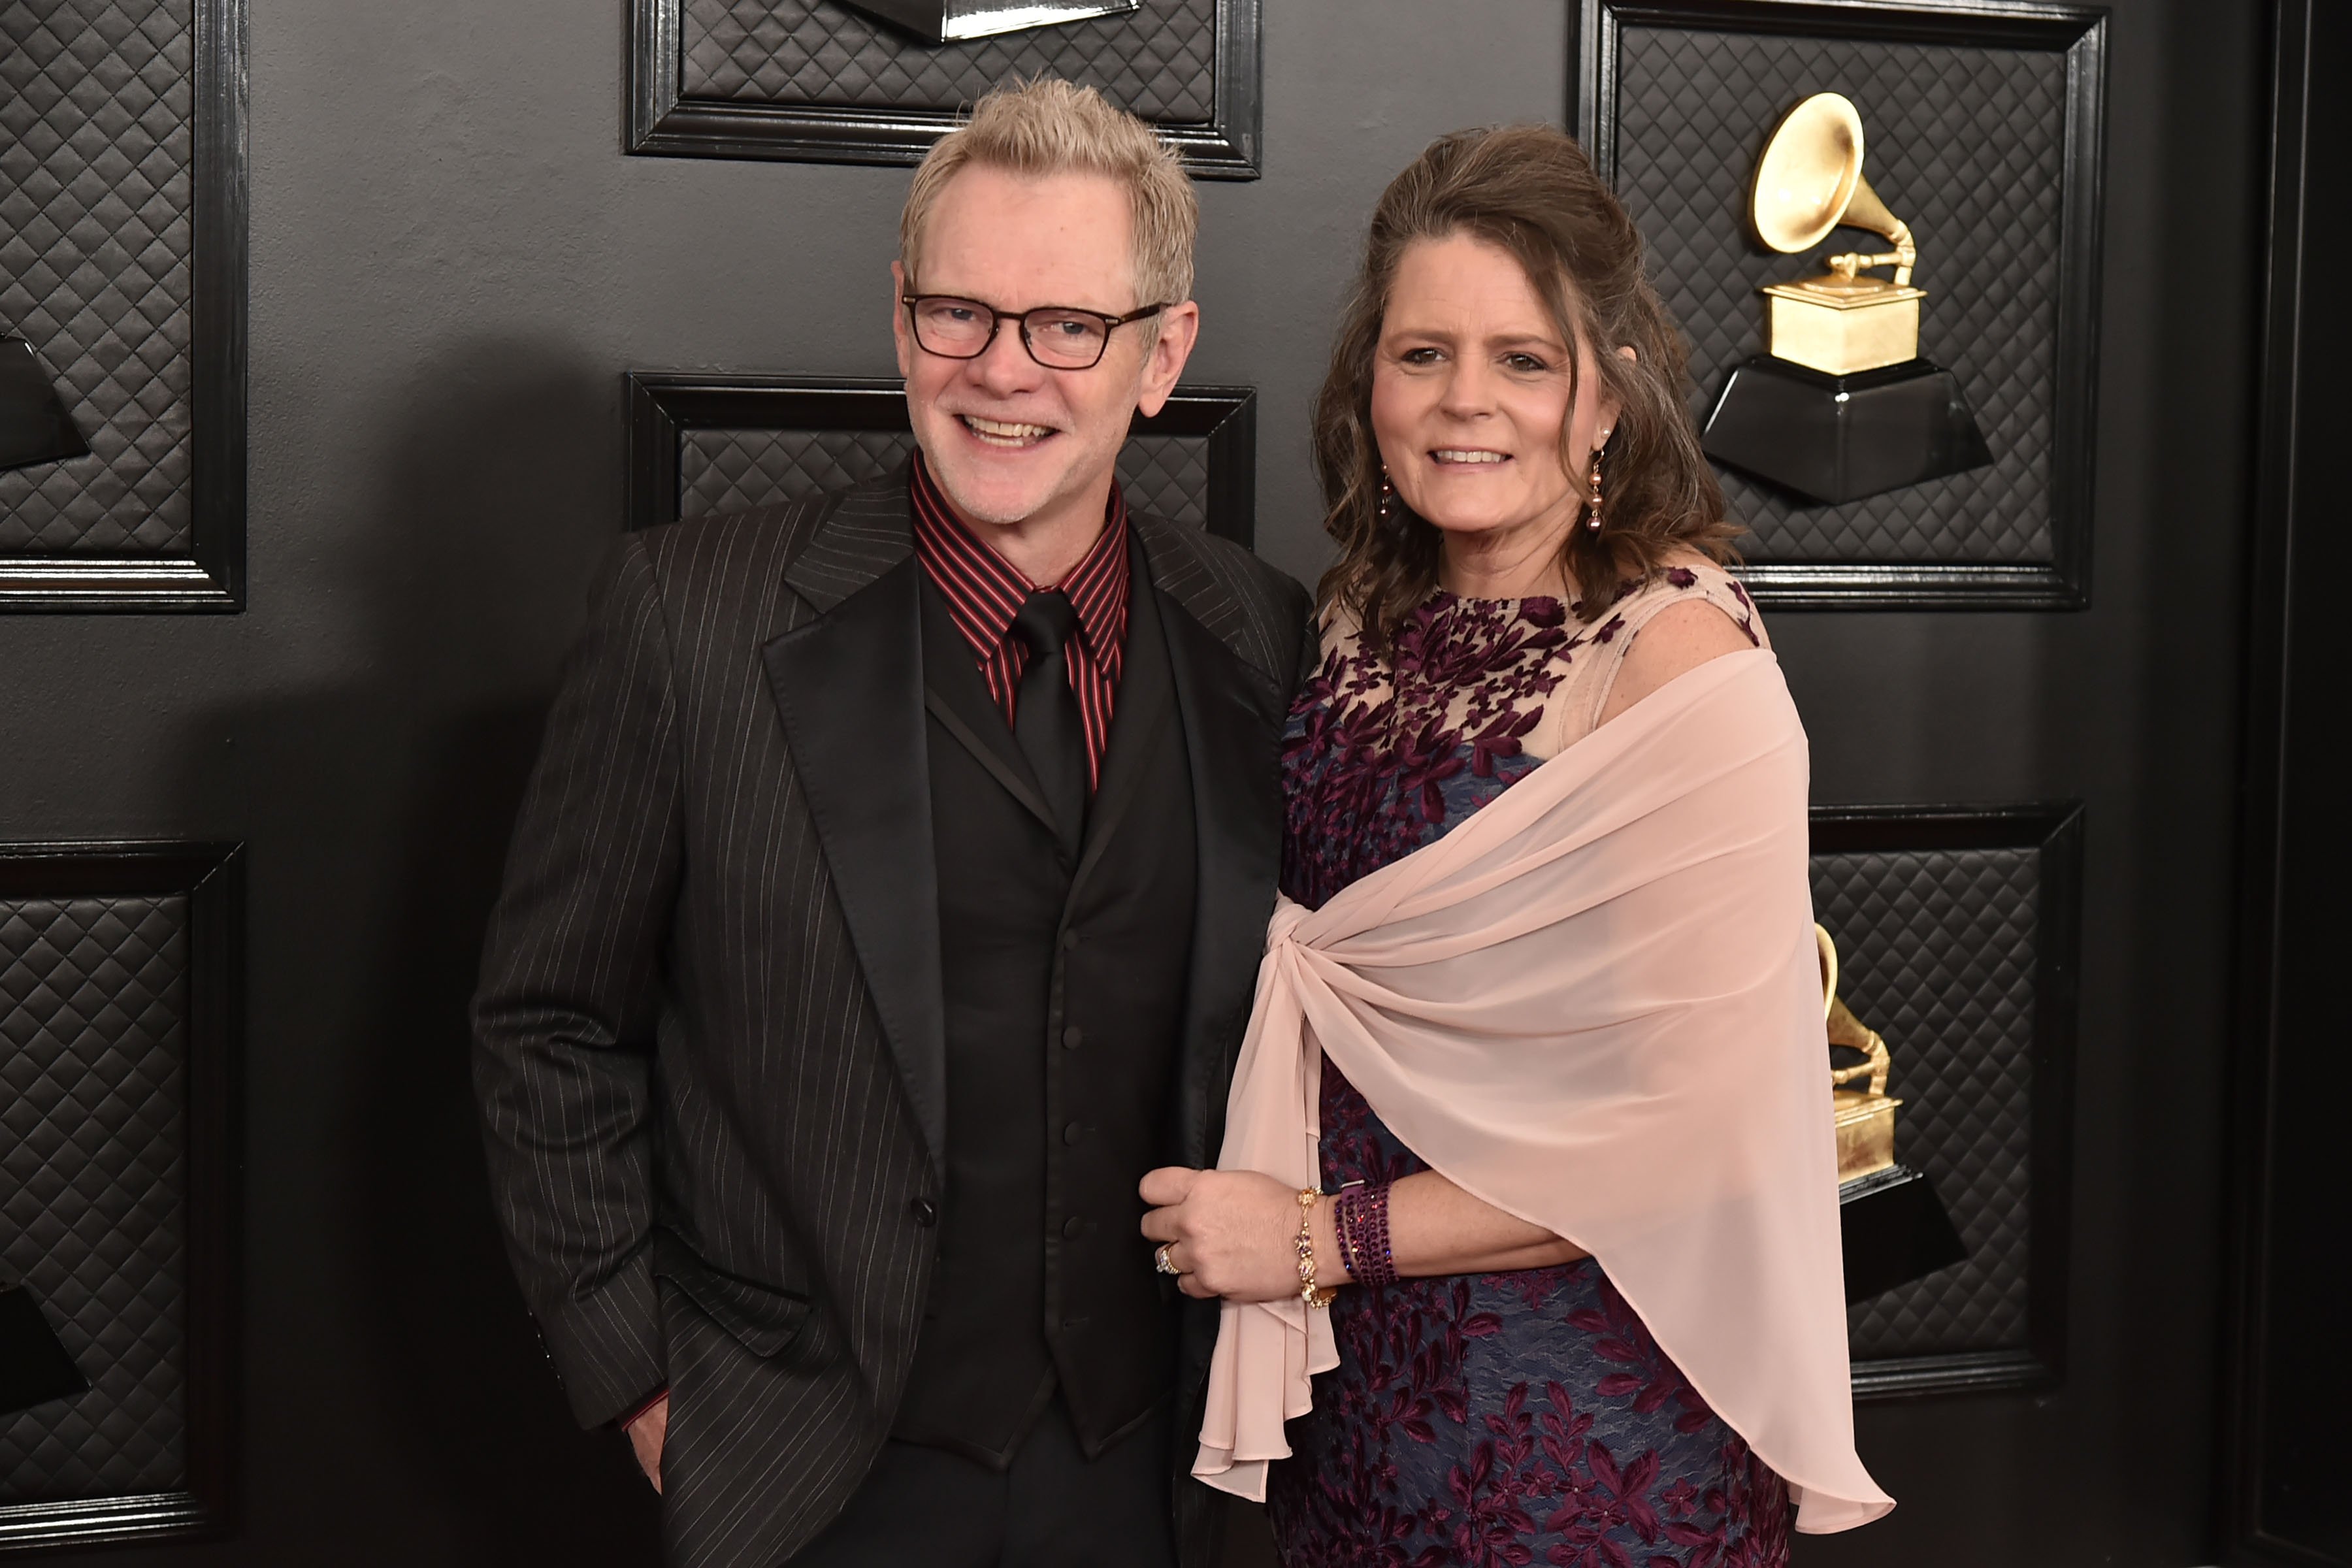 Steven Curtis Chapman and Mary Beth Chapman attend the 62nd Annual Grammy Awards at Staples Center on January 26, 2020 in Los Angeles, California | Source: Getty Images